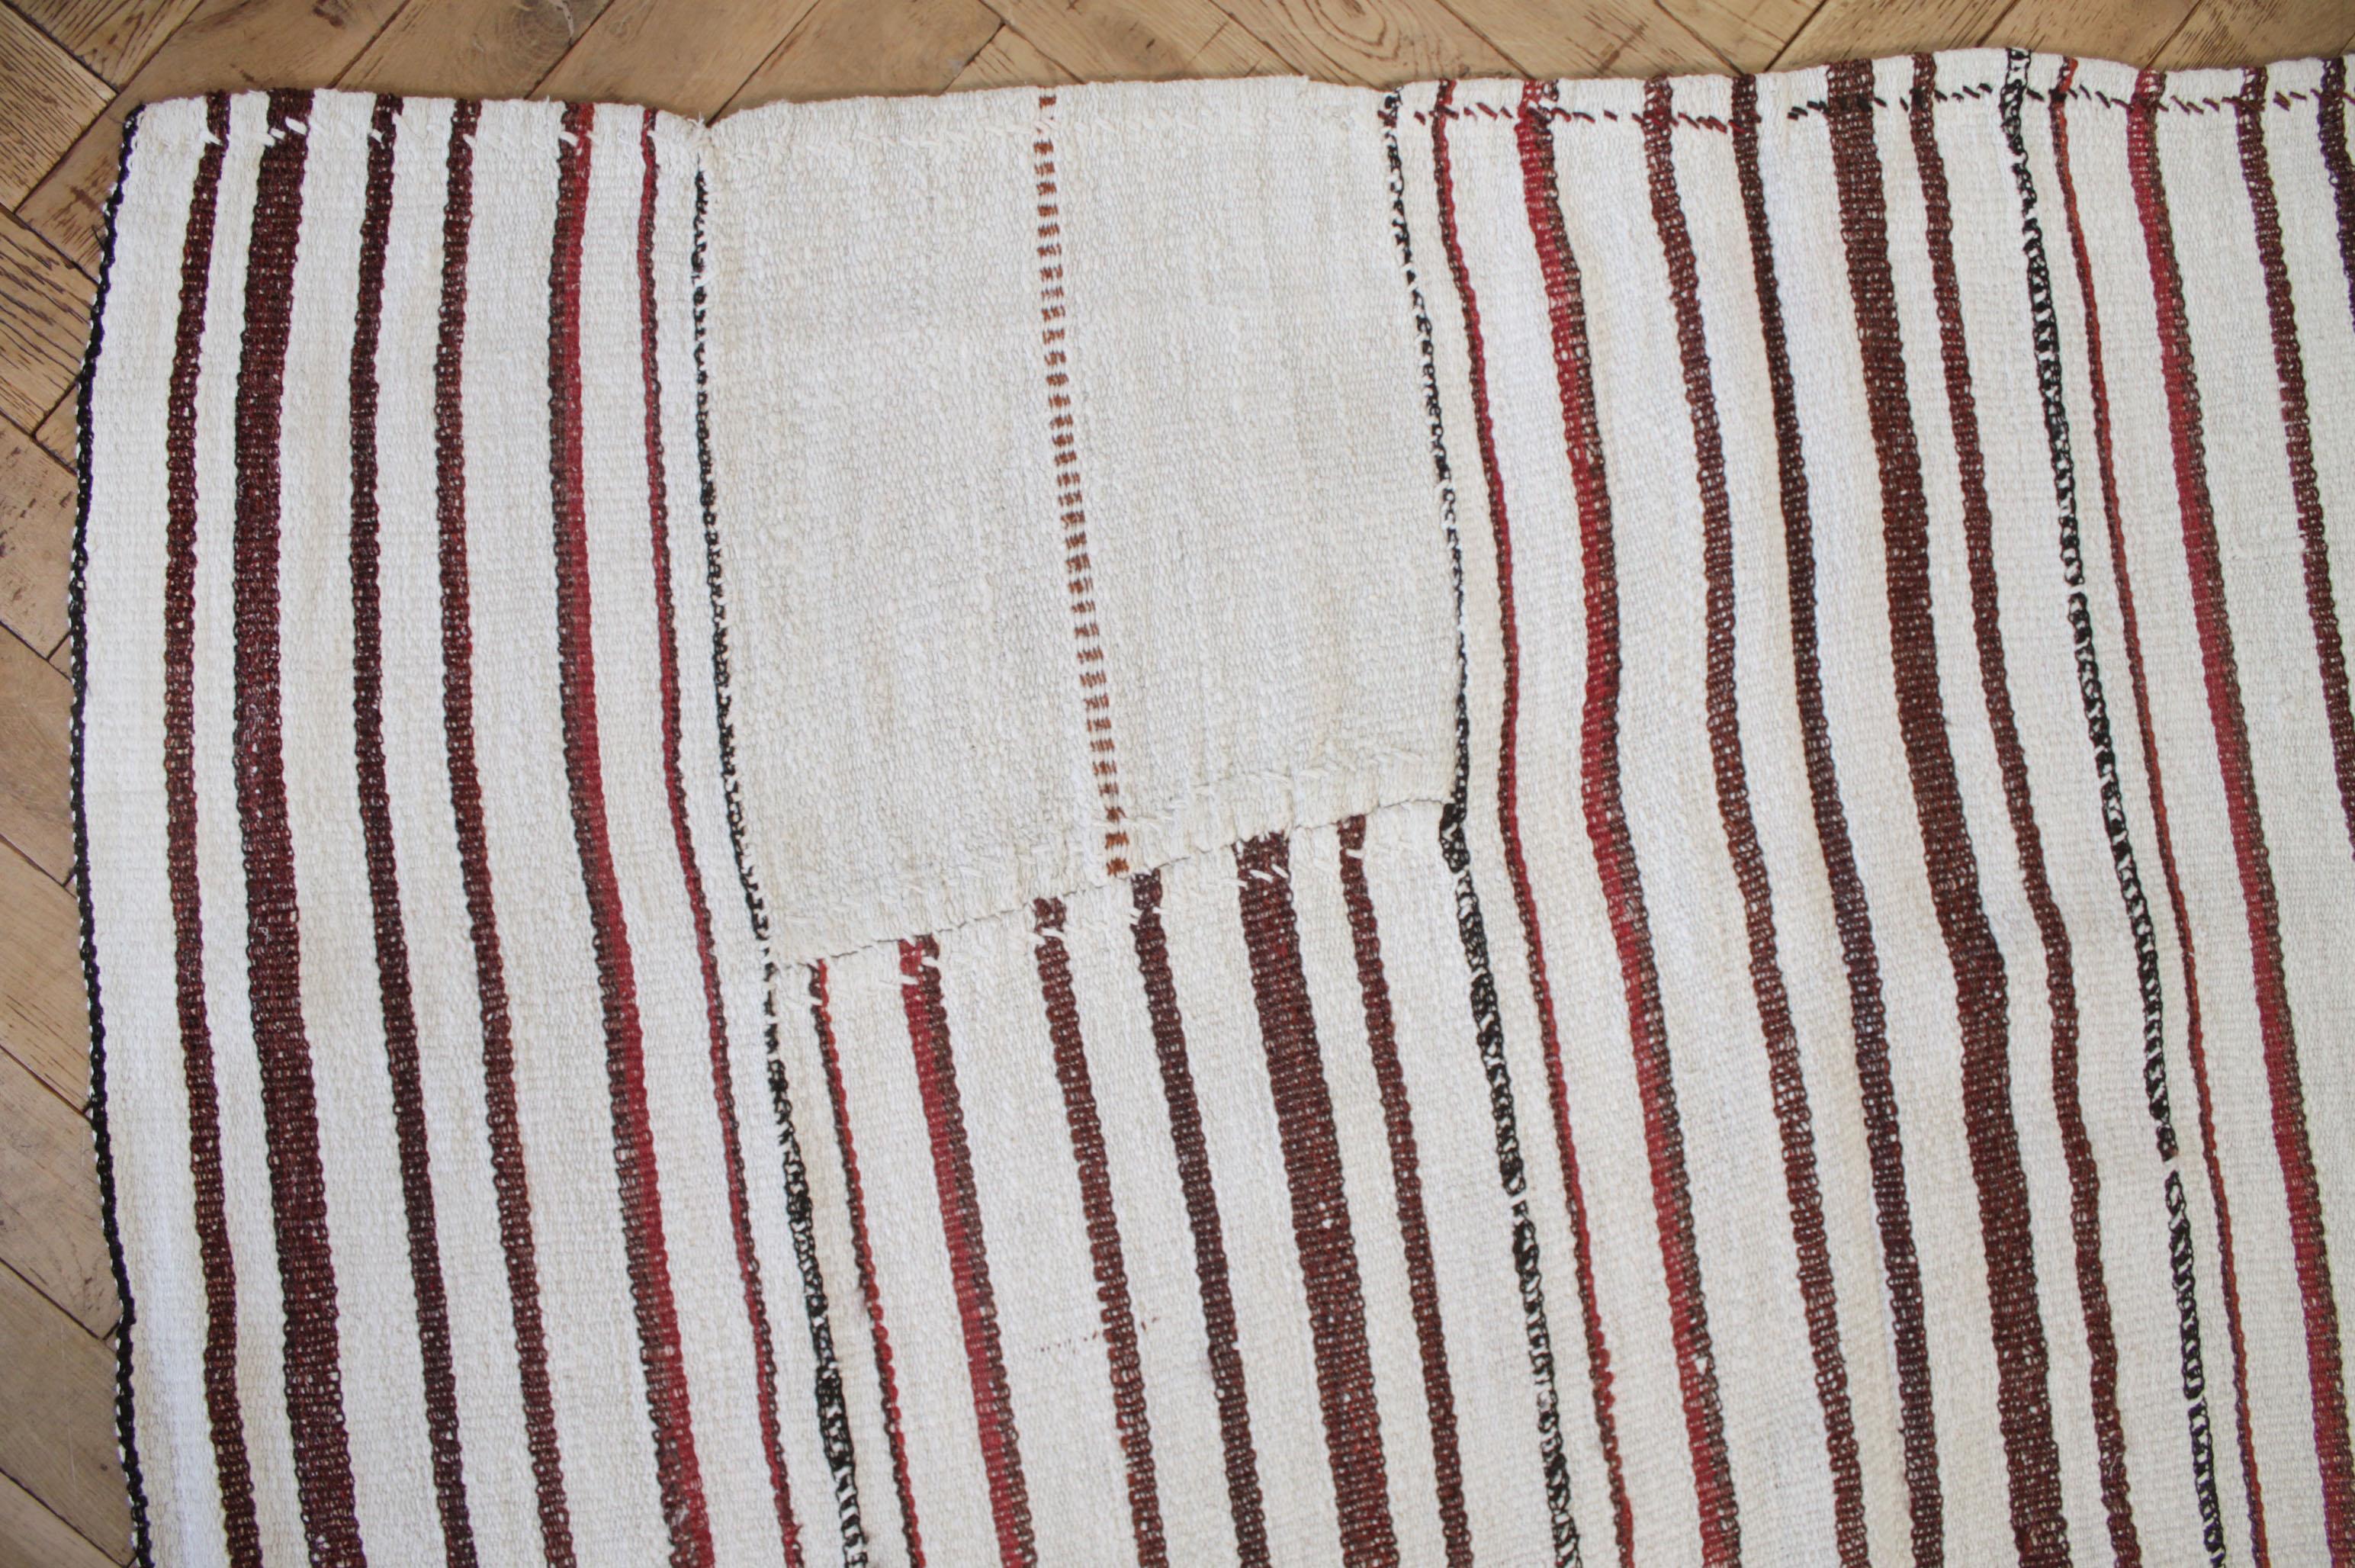 Vintage Hemp Turkish Stripe Rug in White with Brick Tone Colored Stripes For Sale 1